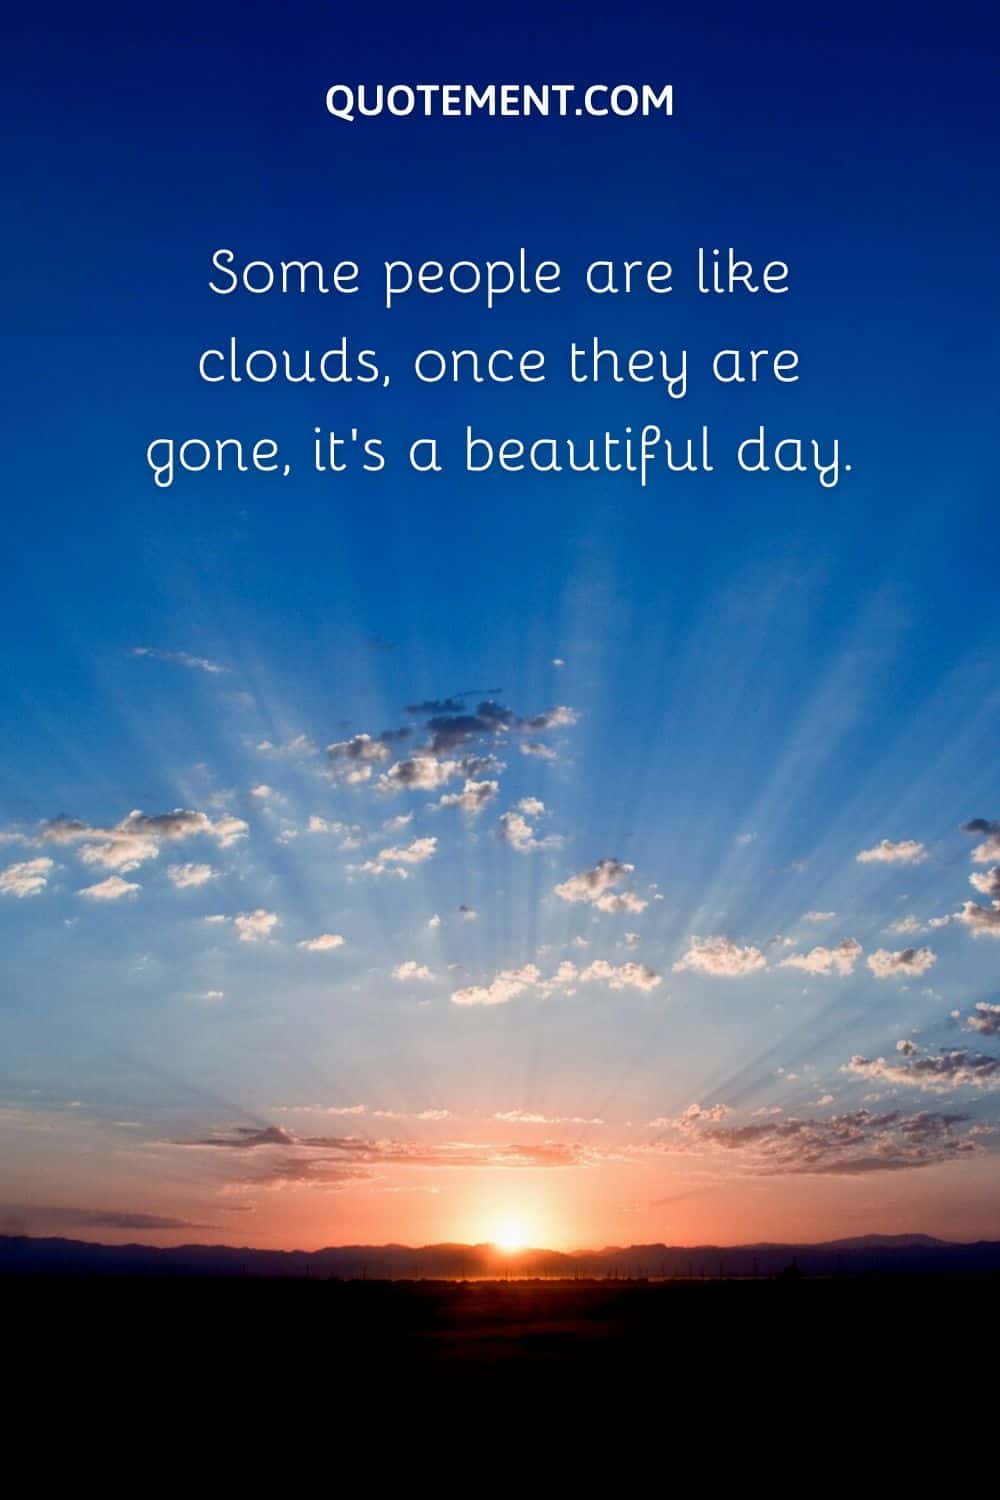 Some people are like clouds, once they are gone, it’s a beautiful day.